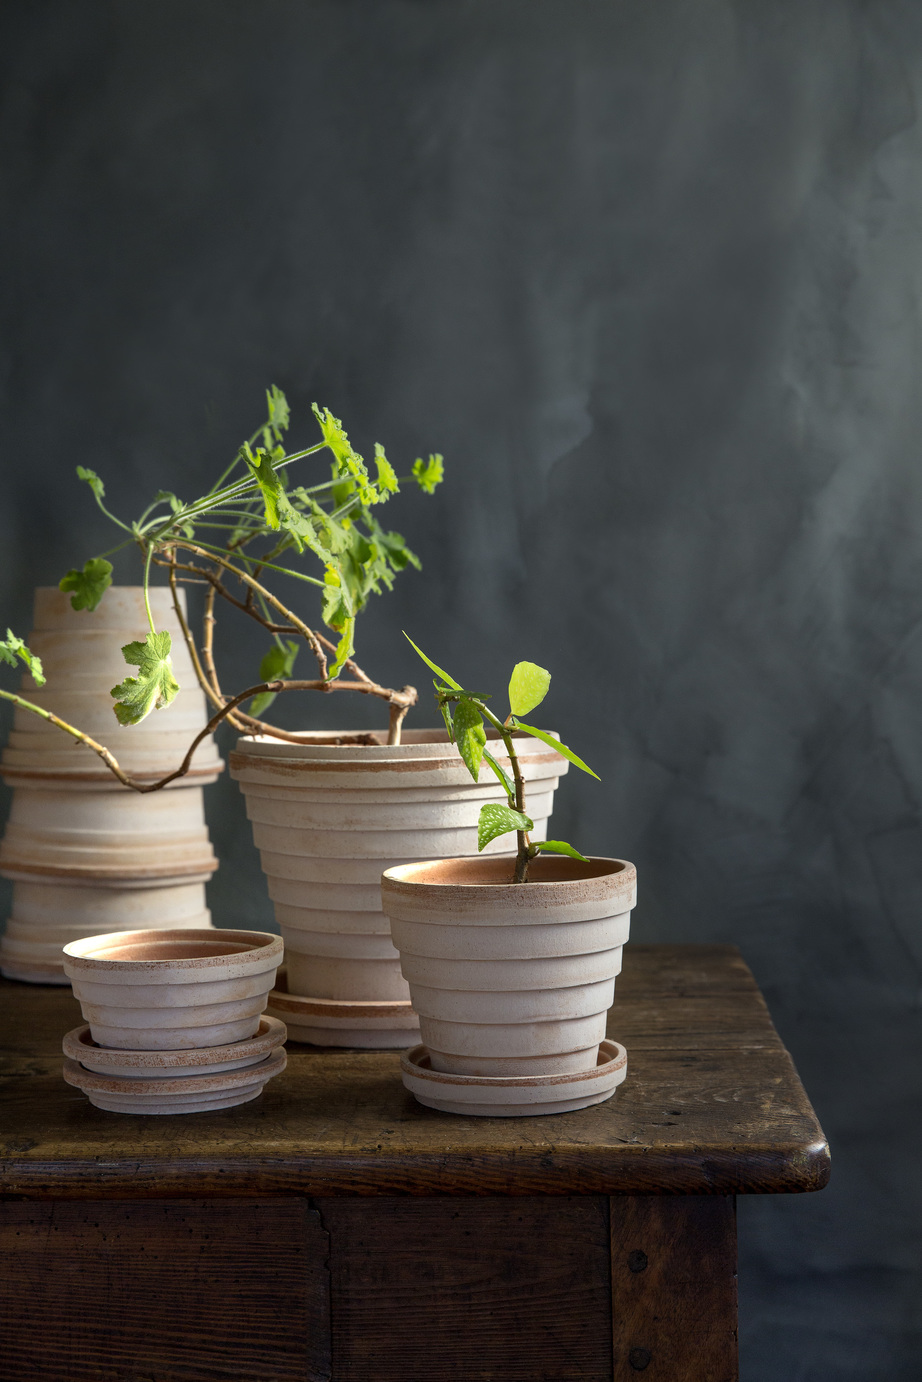 Raw rose terracotta pots with plants on a table.